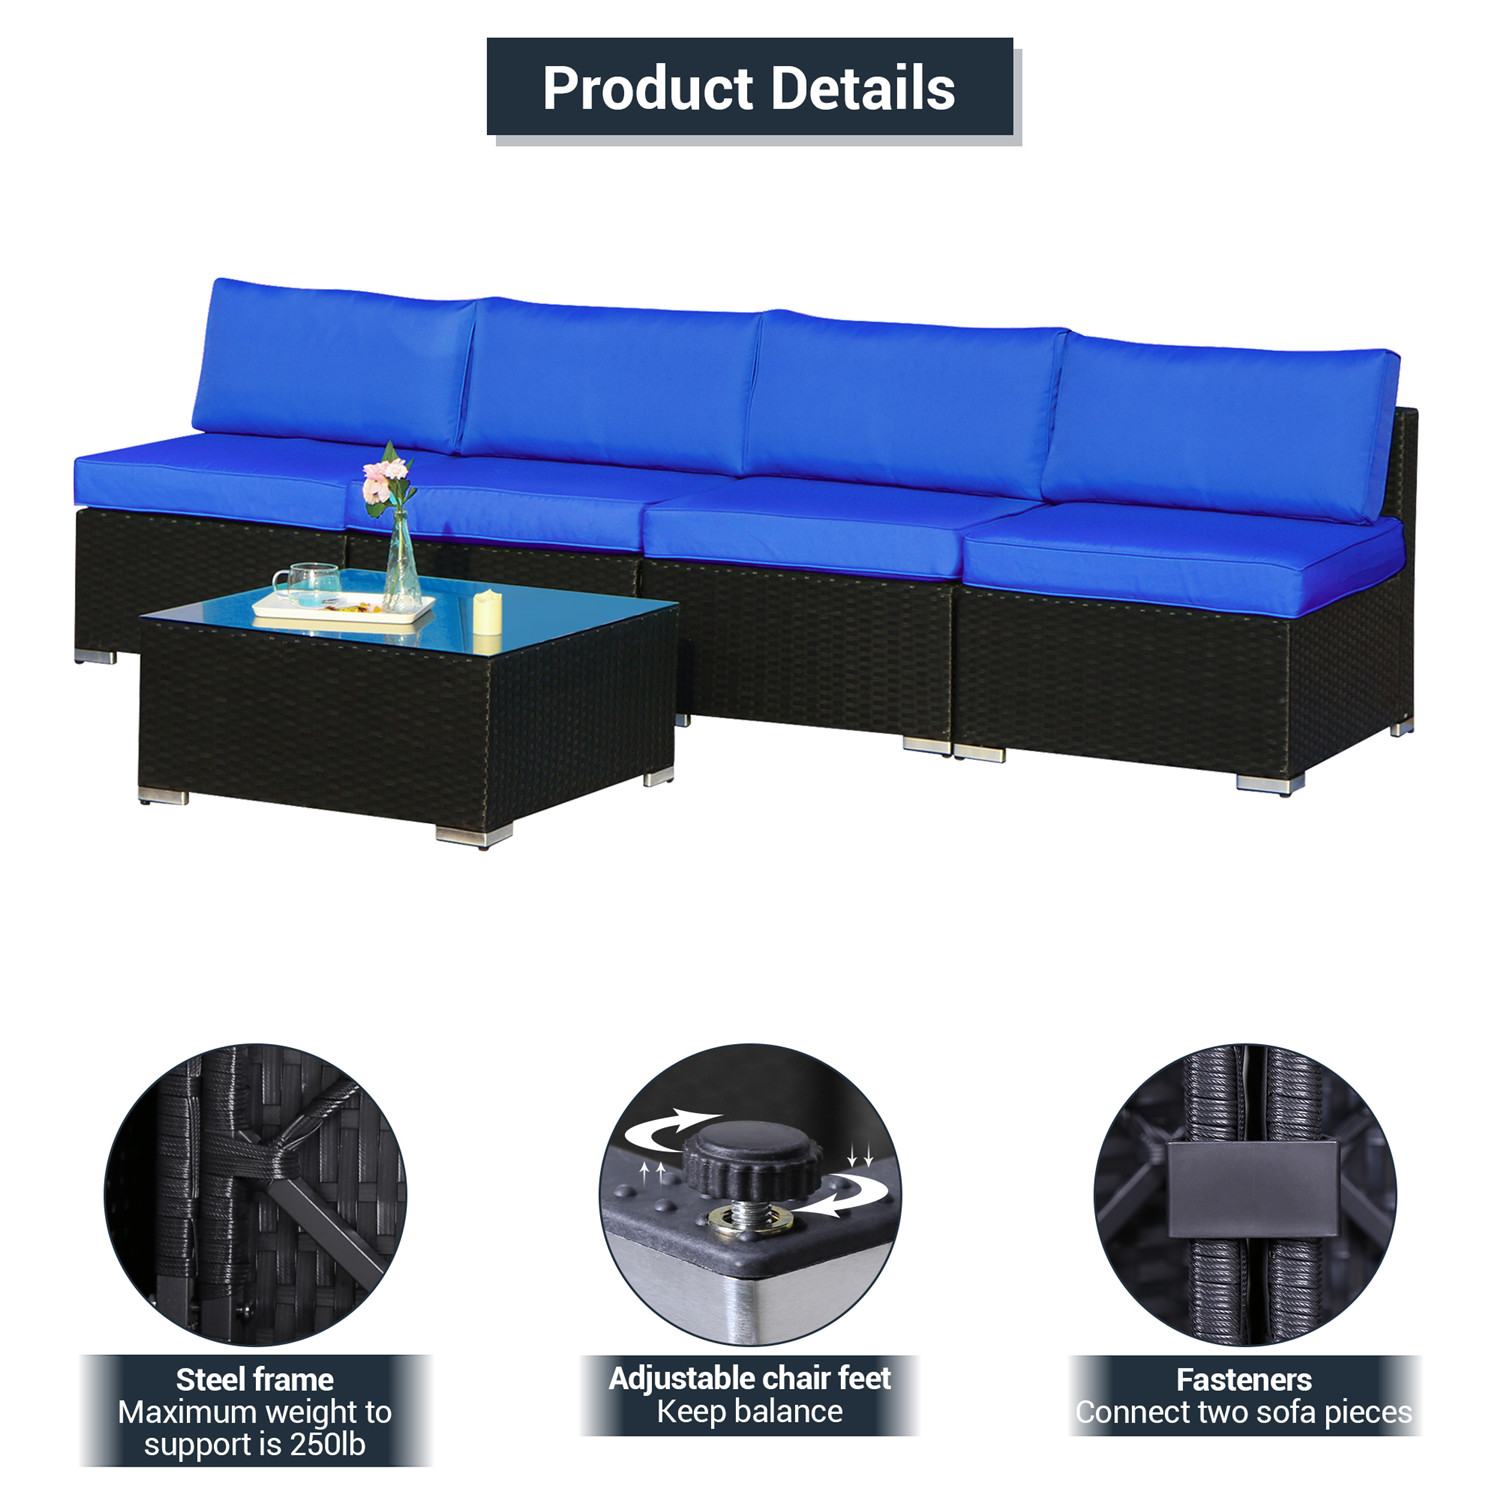 Cozyhom 5 Piece Patio Furniture Sets, All-Weather PE Wicker Rattan Outdoor Sectional Sofa with Coffee Table & Washable Couch Cushions, Royal Blue - image 2 of 5